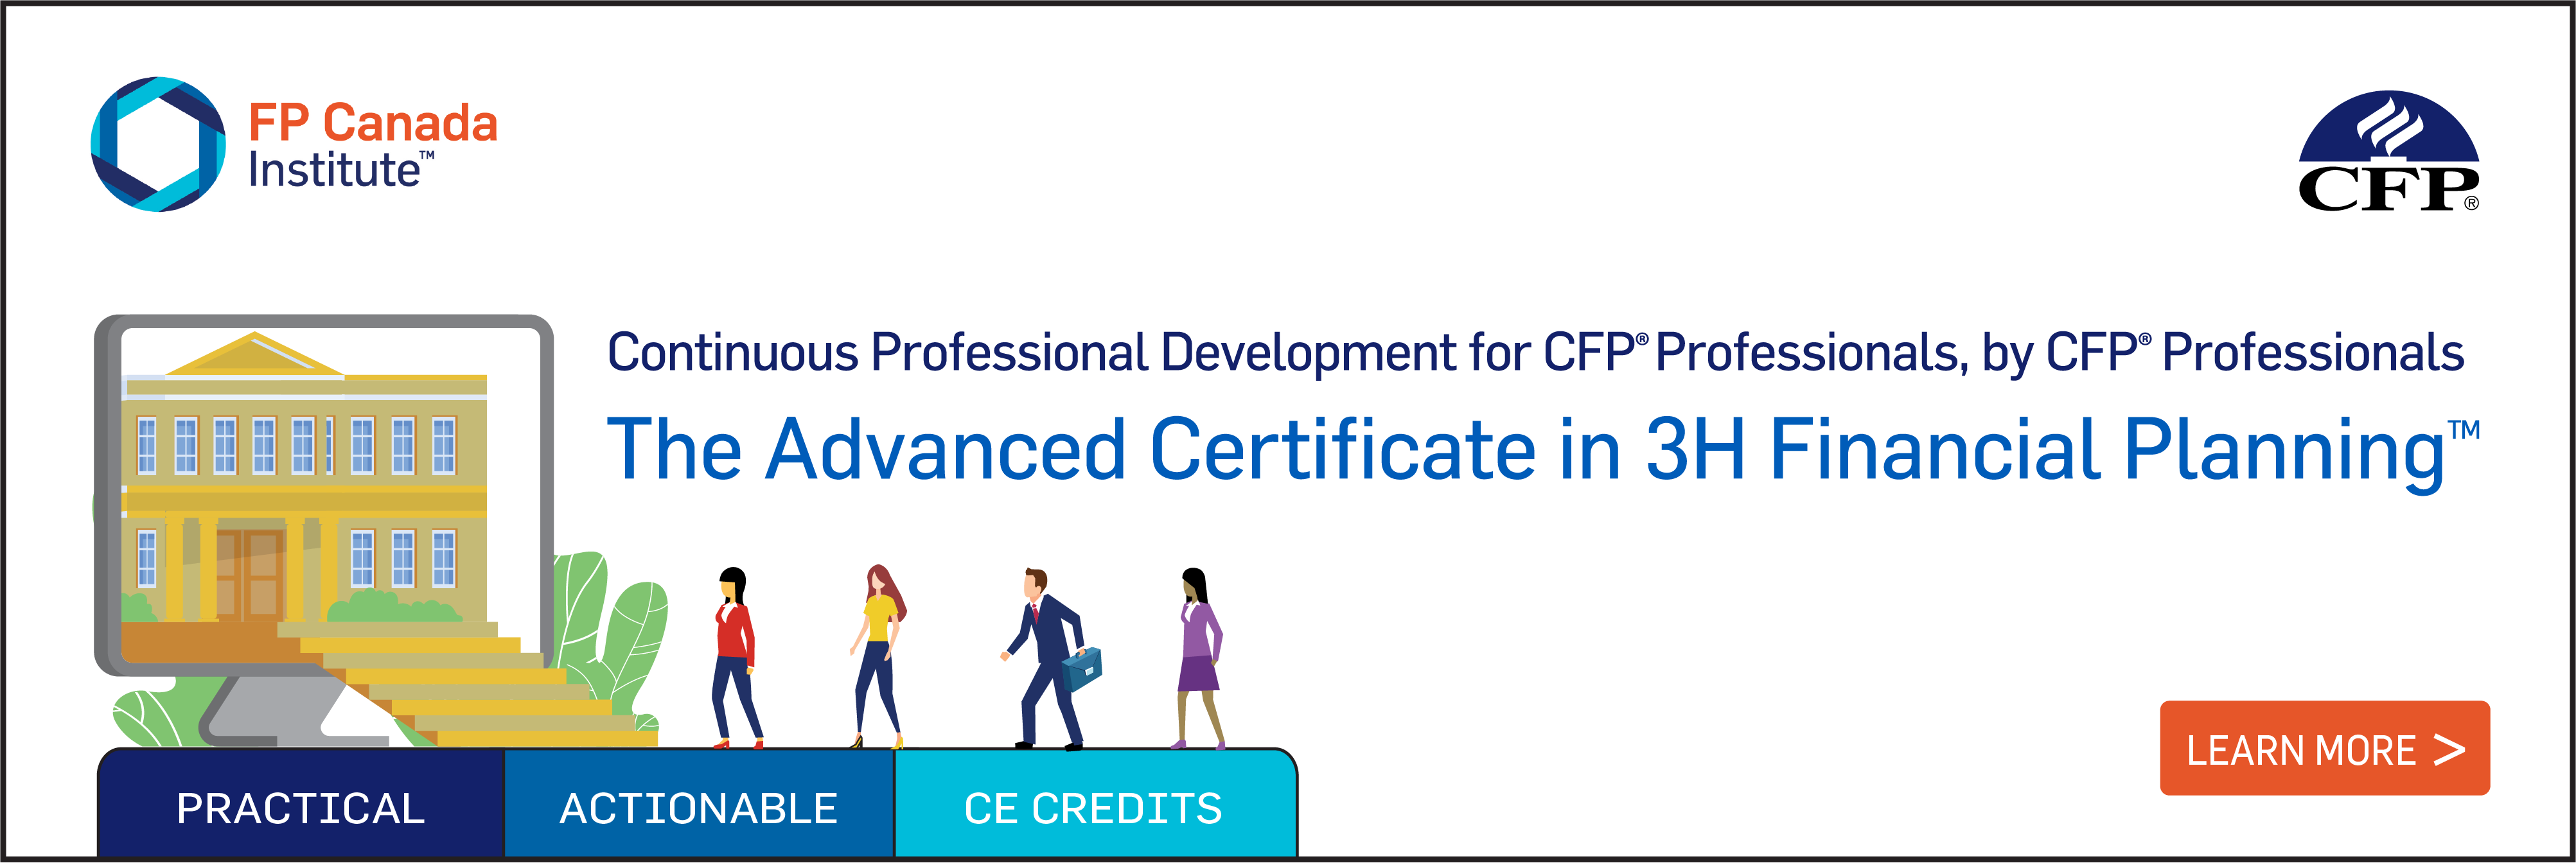 Continuous Professional Development for CFP Professionals, by CFP Professionals. The Advanced Certificate in 3H Financial Planning. Learn more